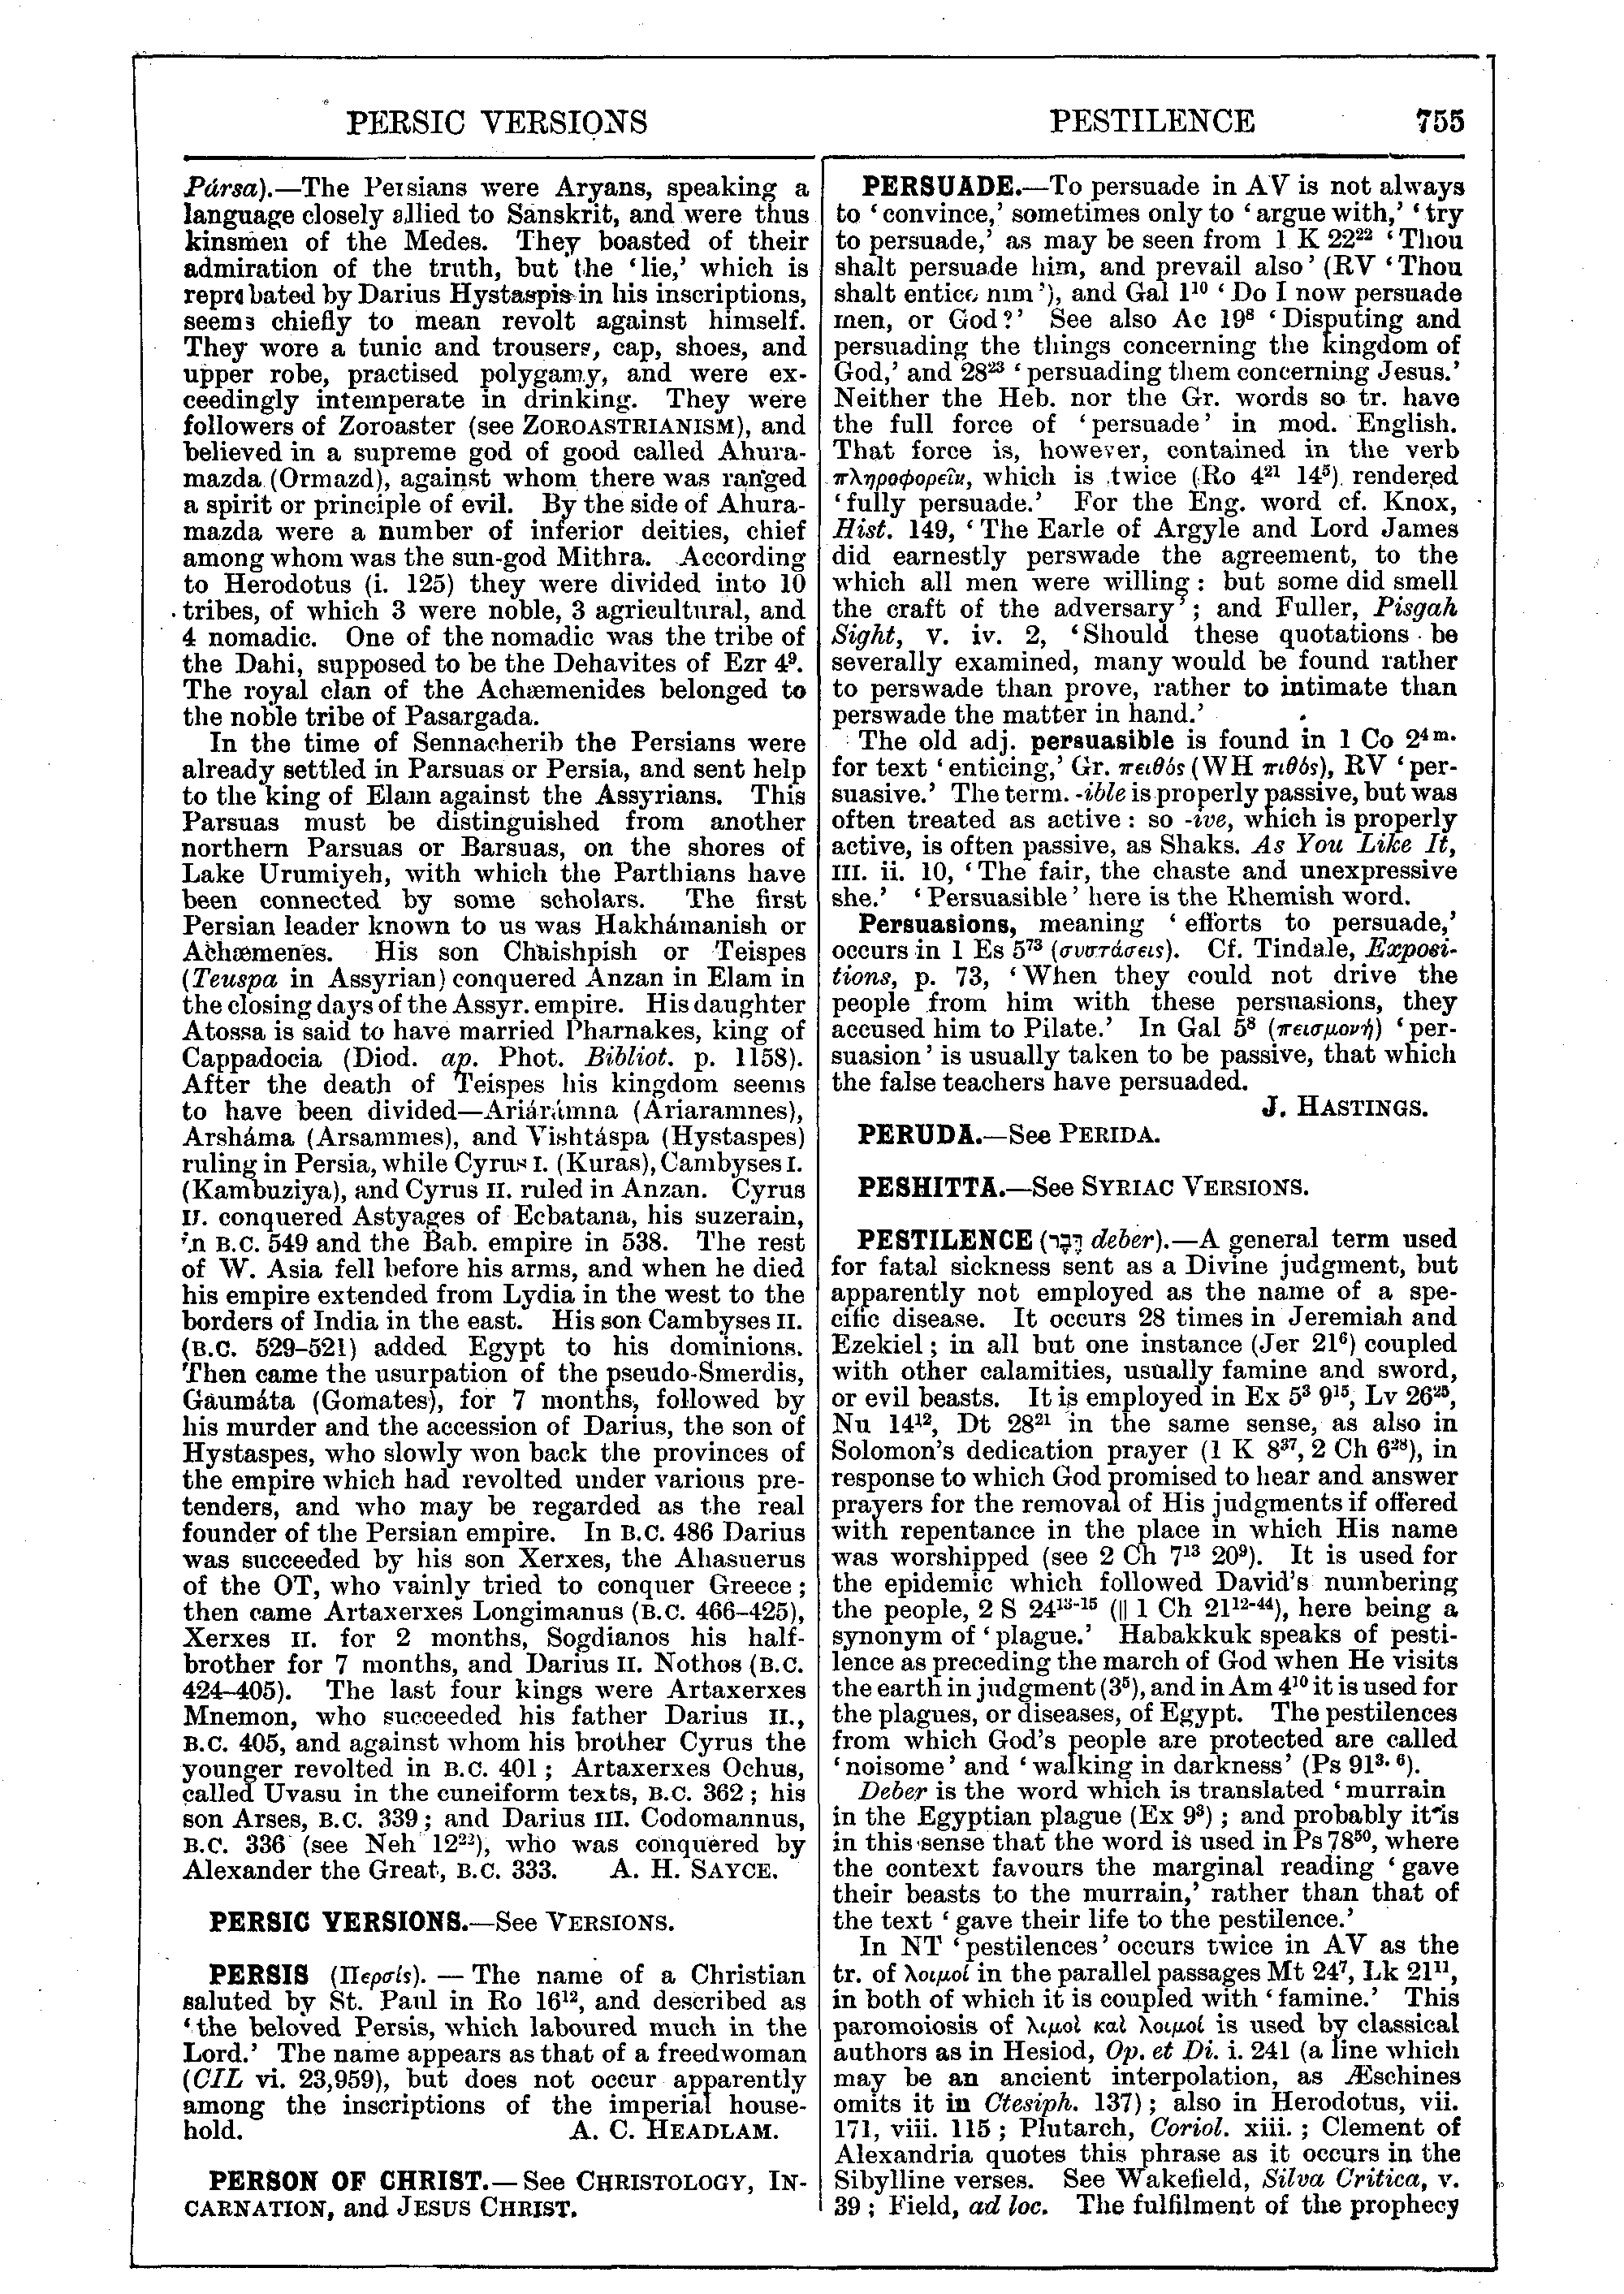 Image of page 755